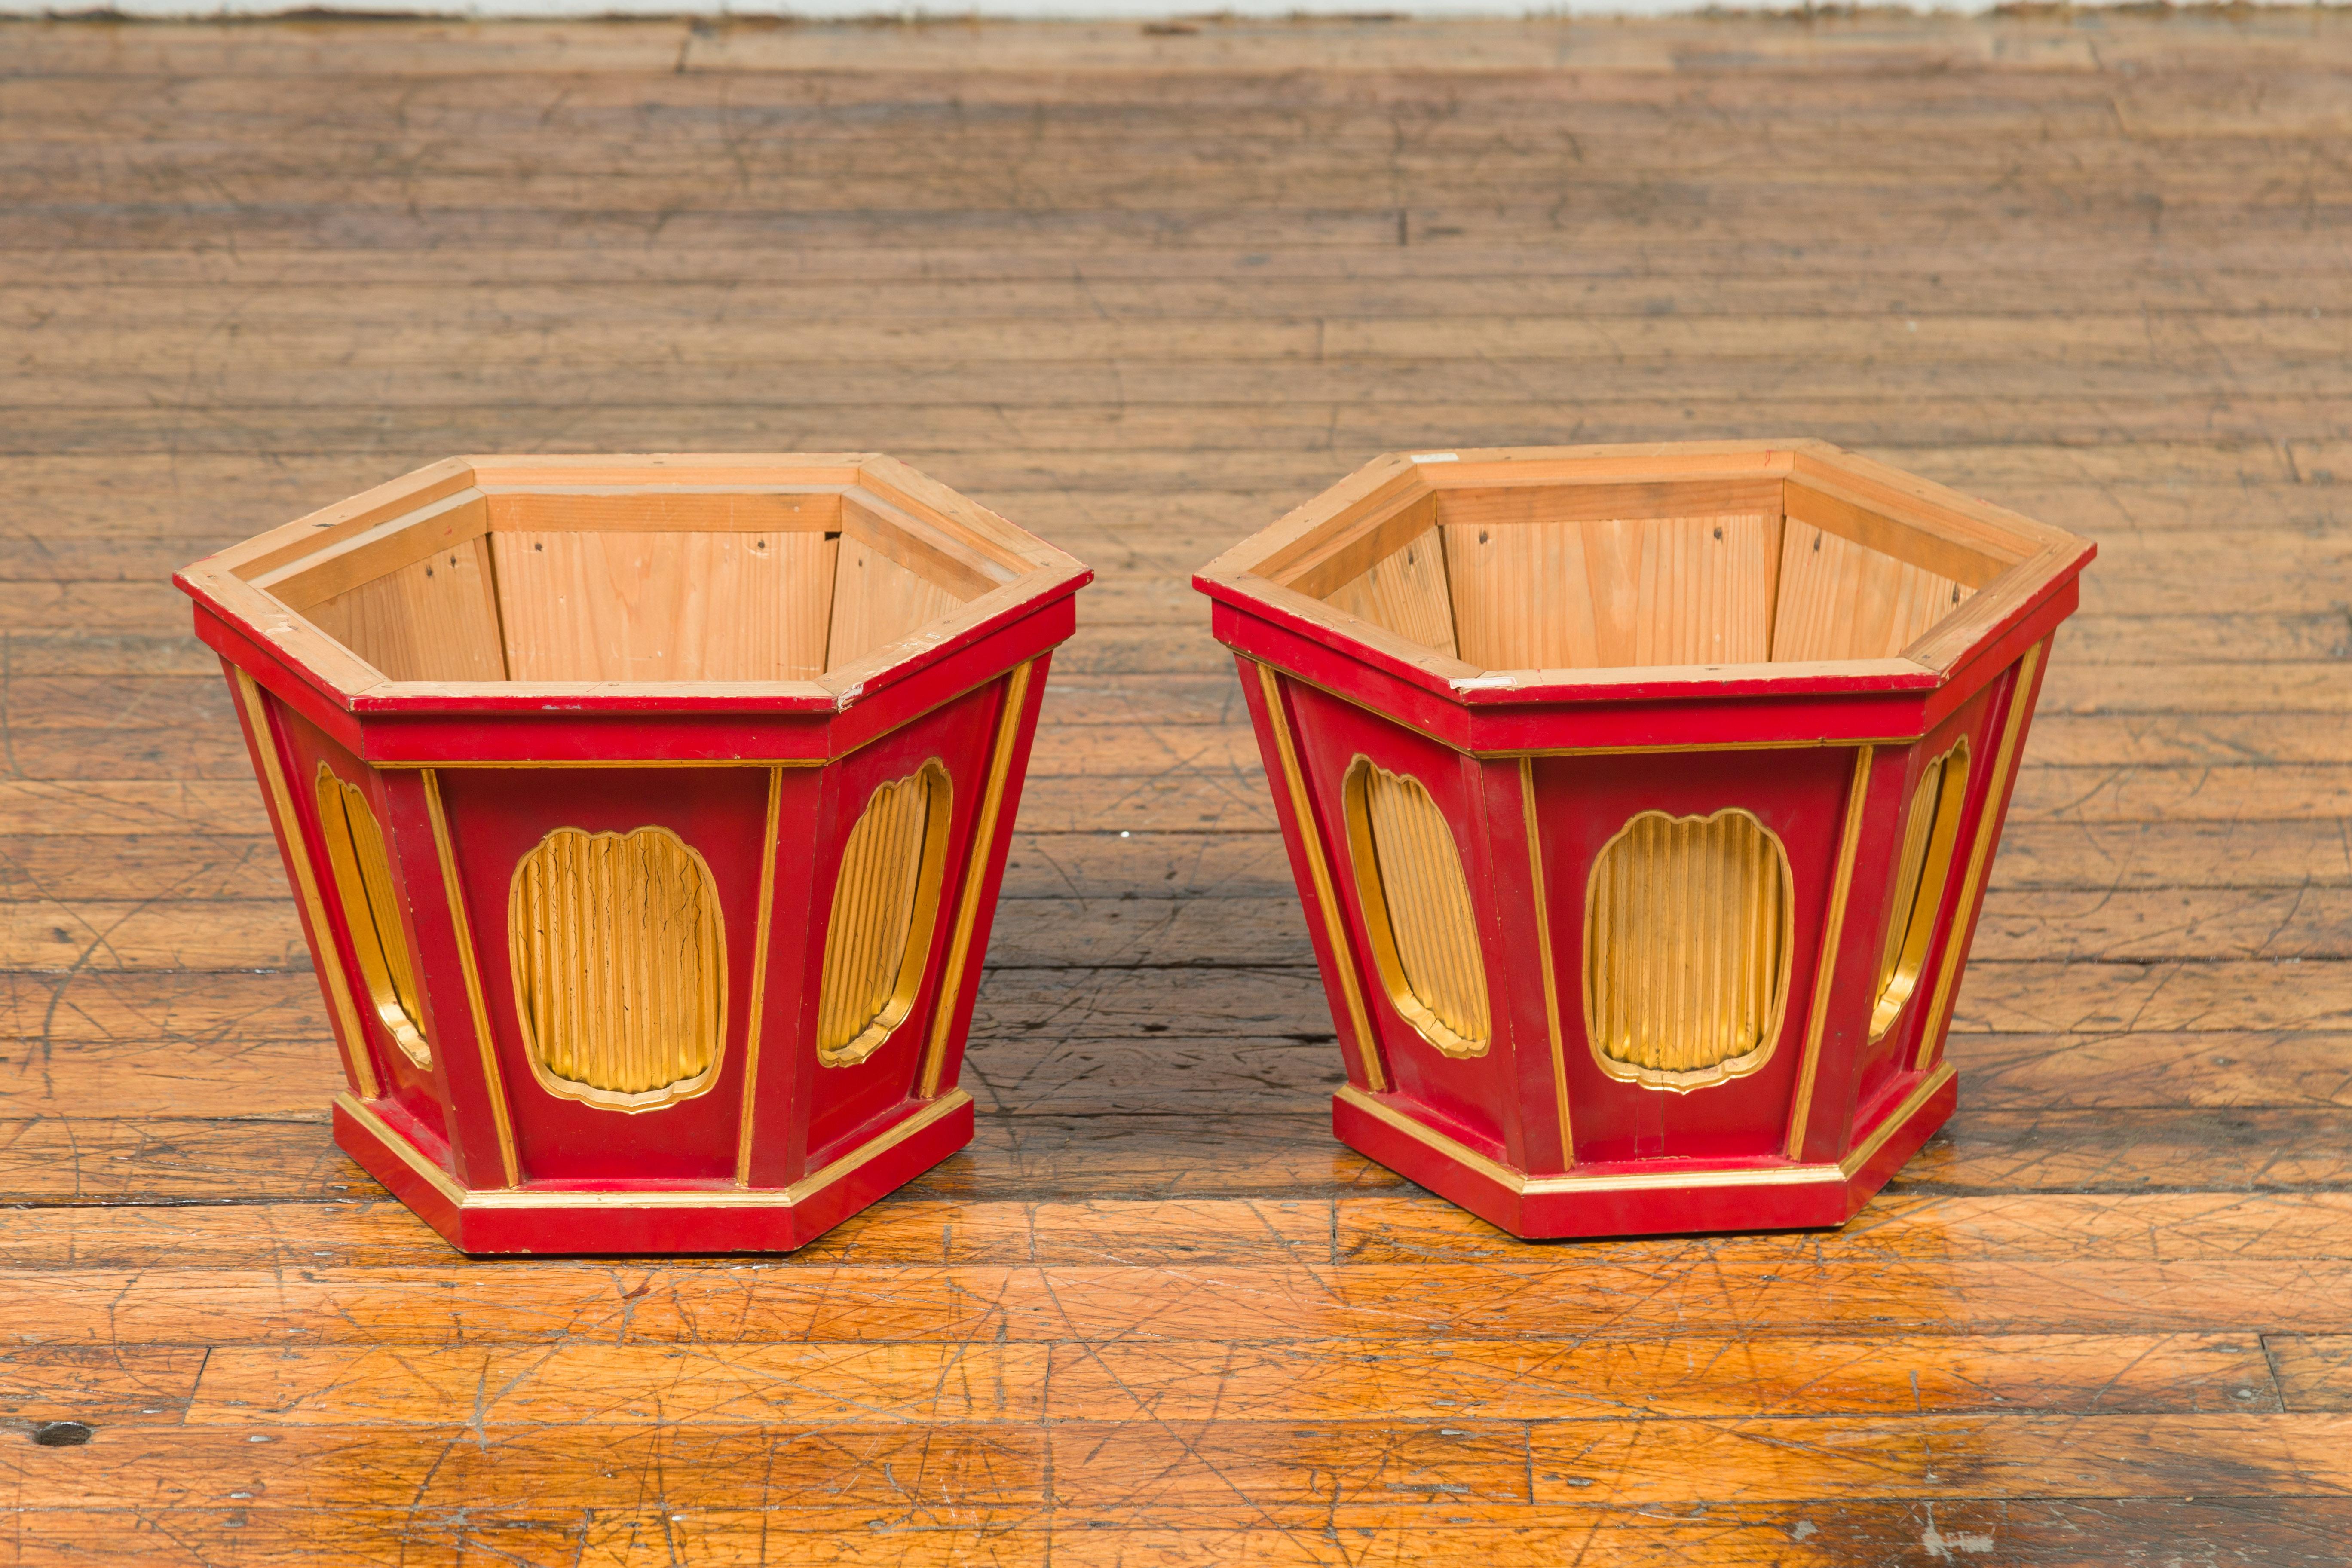 A pair of Japanese Taisho period gold and red lacquer hexagonal planters from the early 20th century, with recessed reeded cartouches. Hailing from the Taisho period in Japan (1912-1926), this captivating pair of hexagonal planters is a testament to